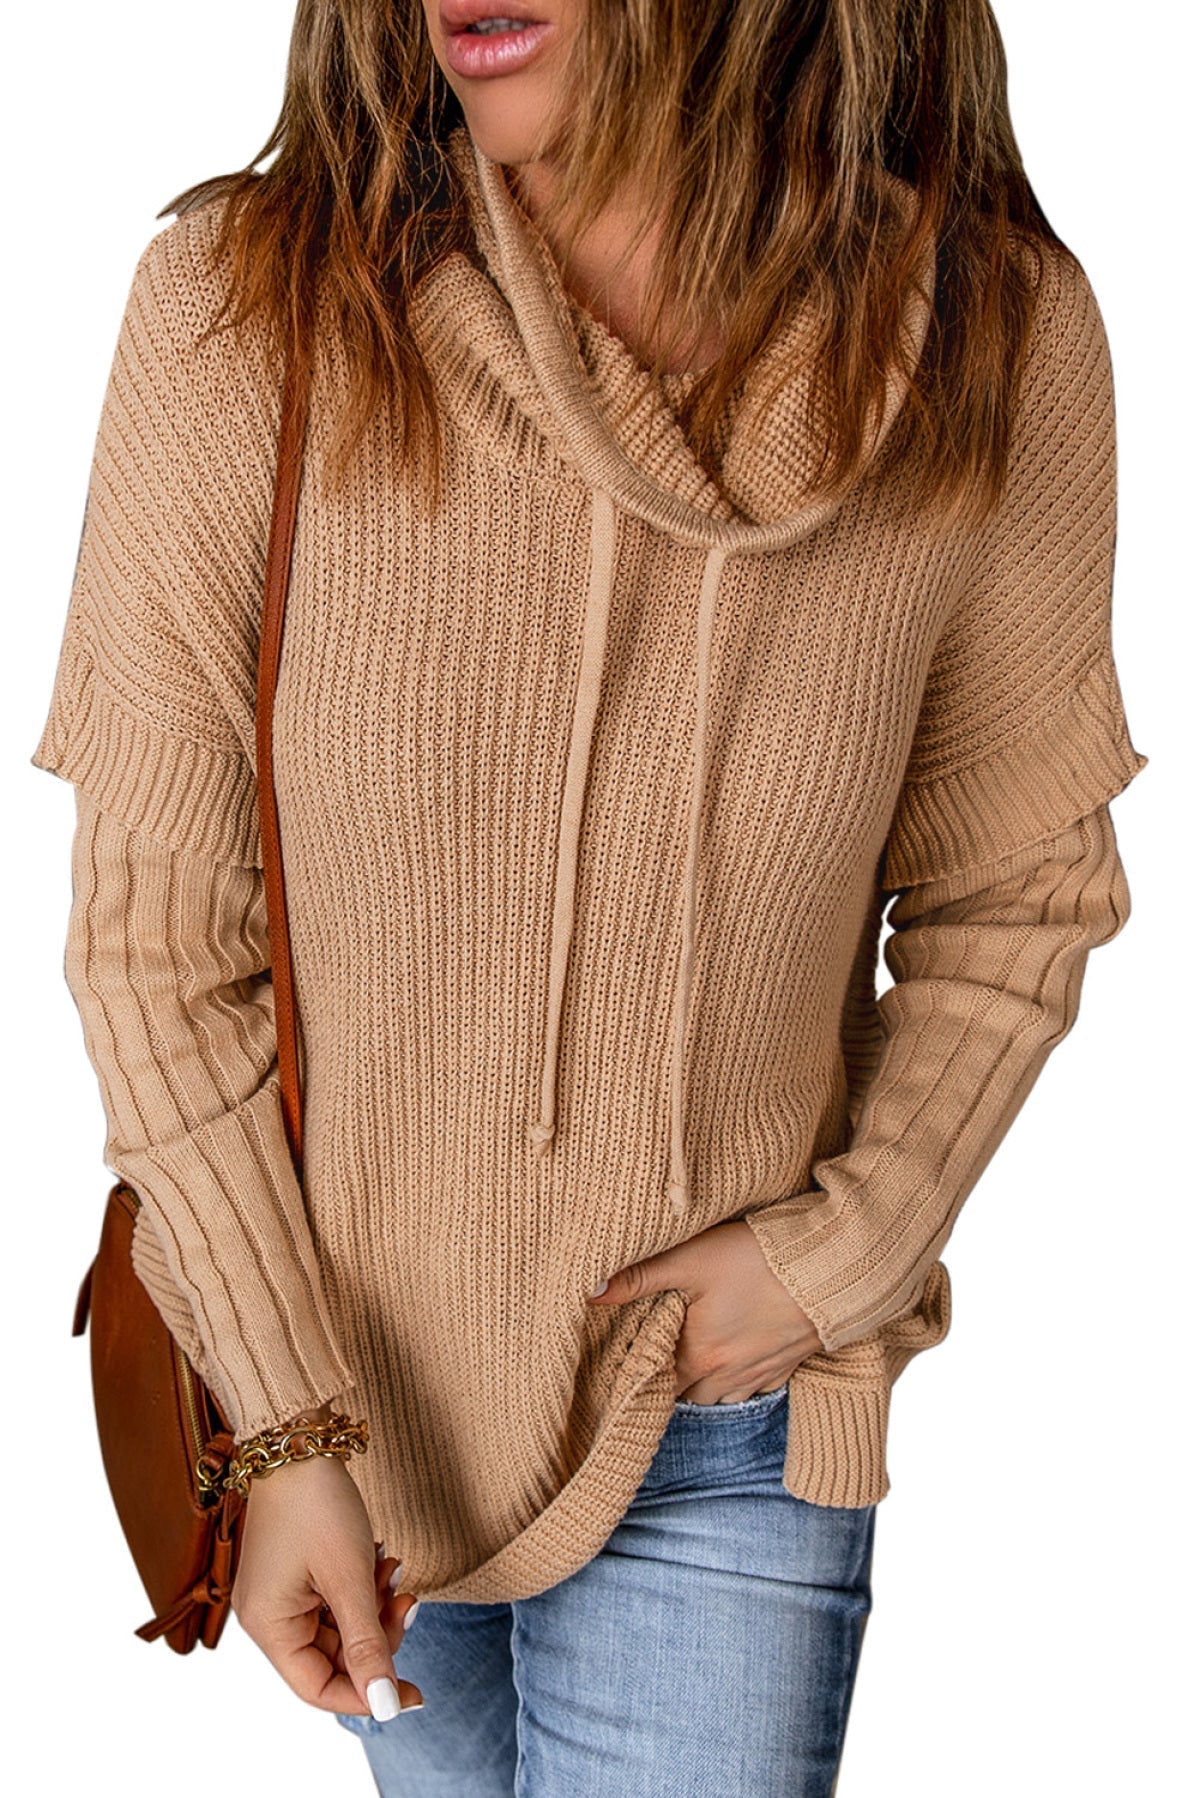 Khaki Cowl Neck Drawstring Patchwork Sleeve Sweater - Passion of Essence Boutique